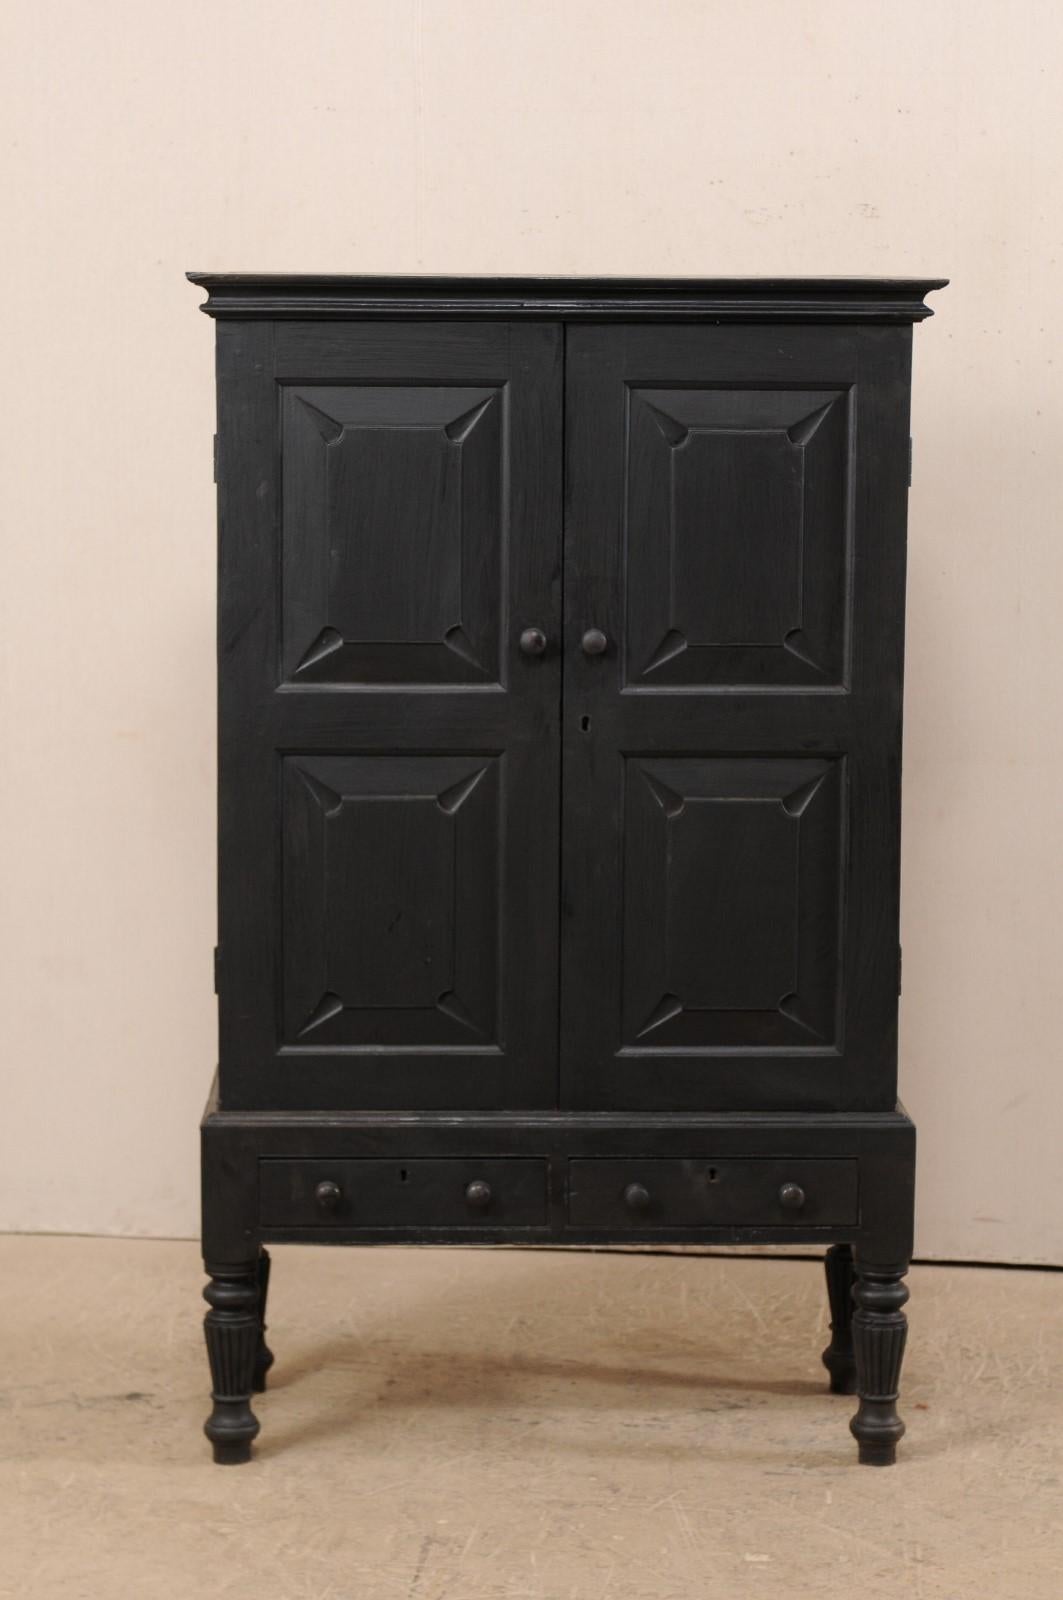 A British Colonial black colored storage cabinet from the mid-20th century. This vintage cabinet features an upper case decorated with geometrically-designed recessed panel front doors and sides, with nicely molded cornice at top. The skirt is made